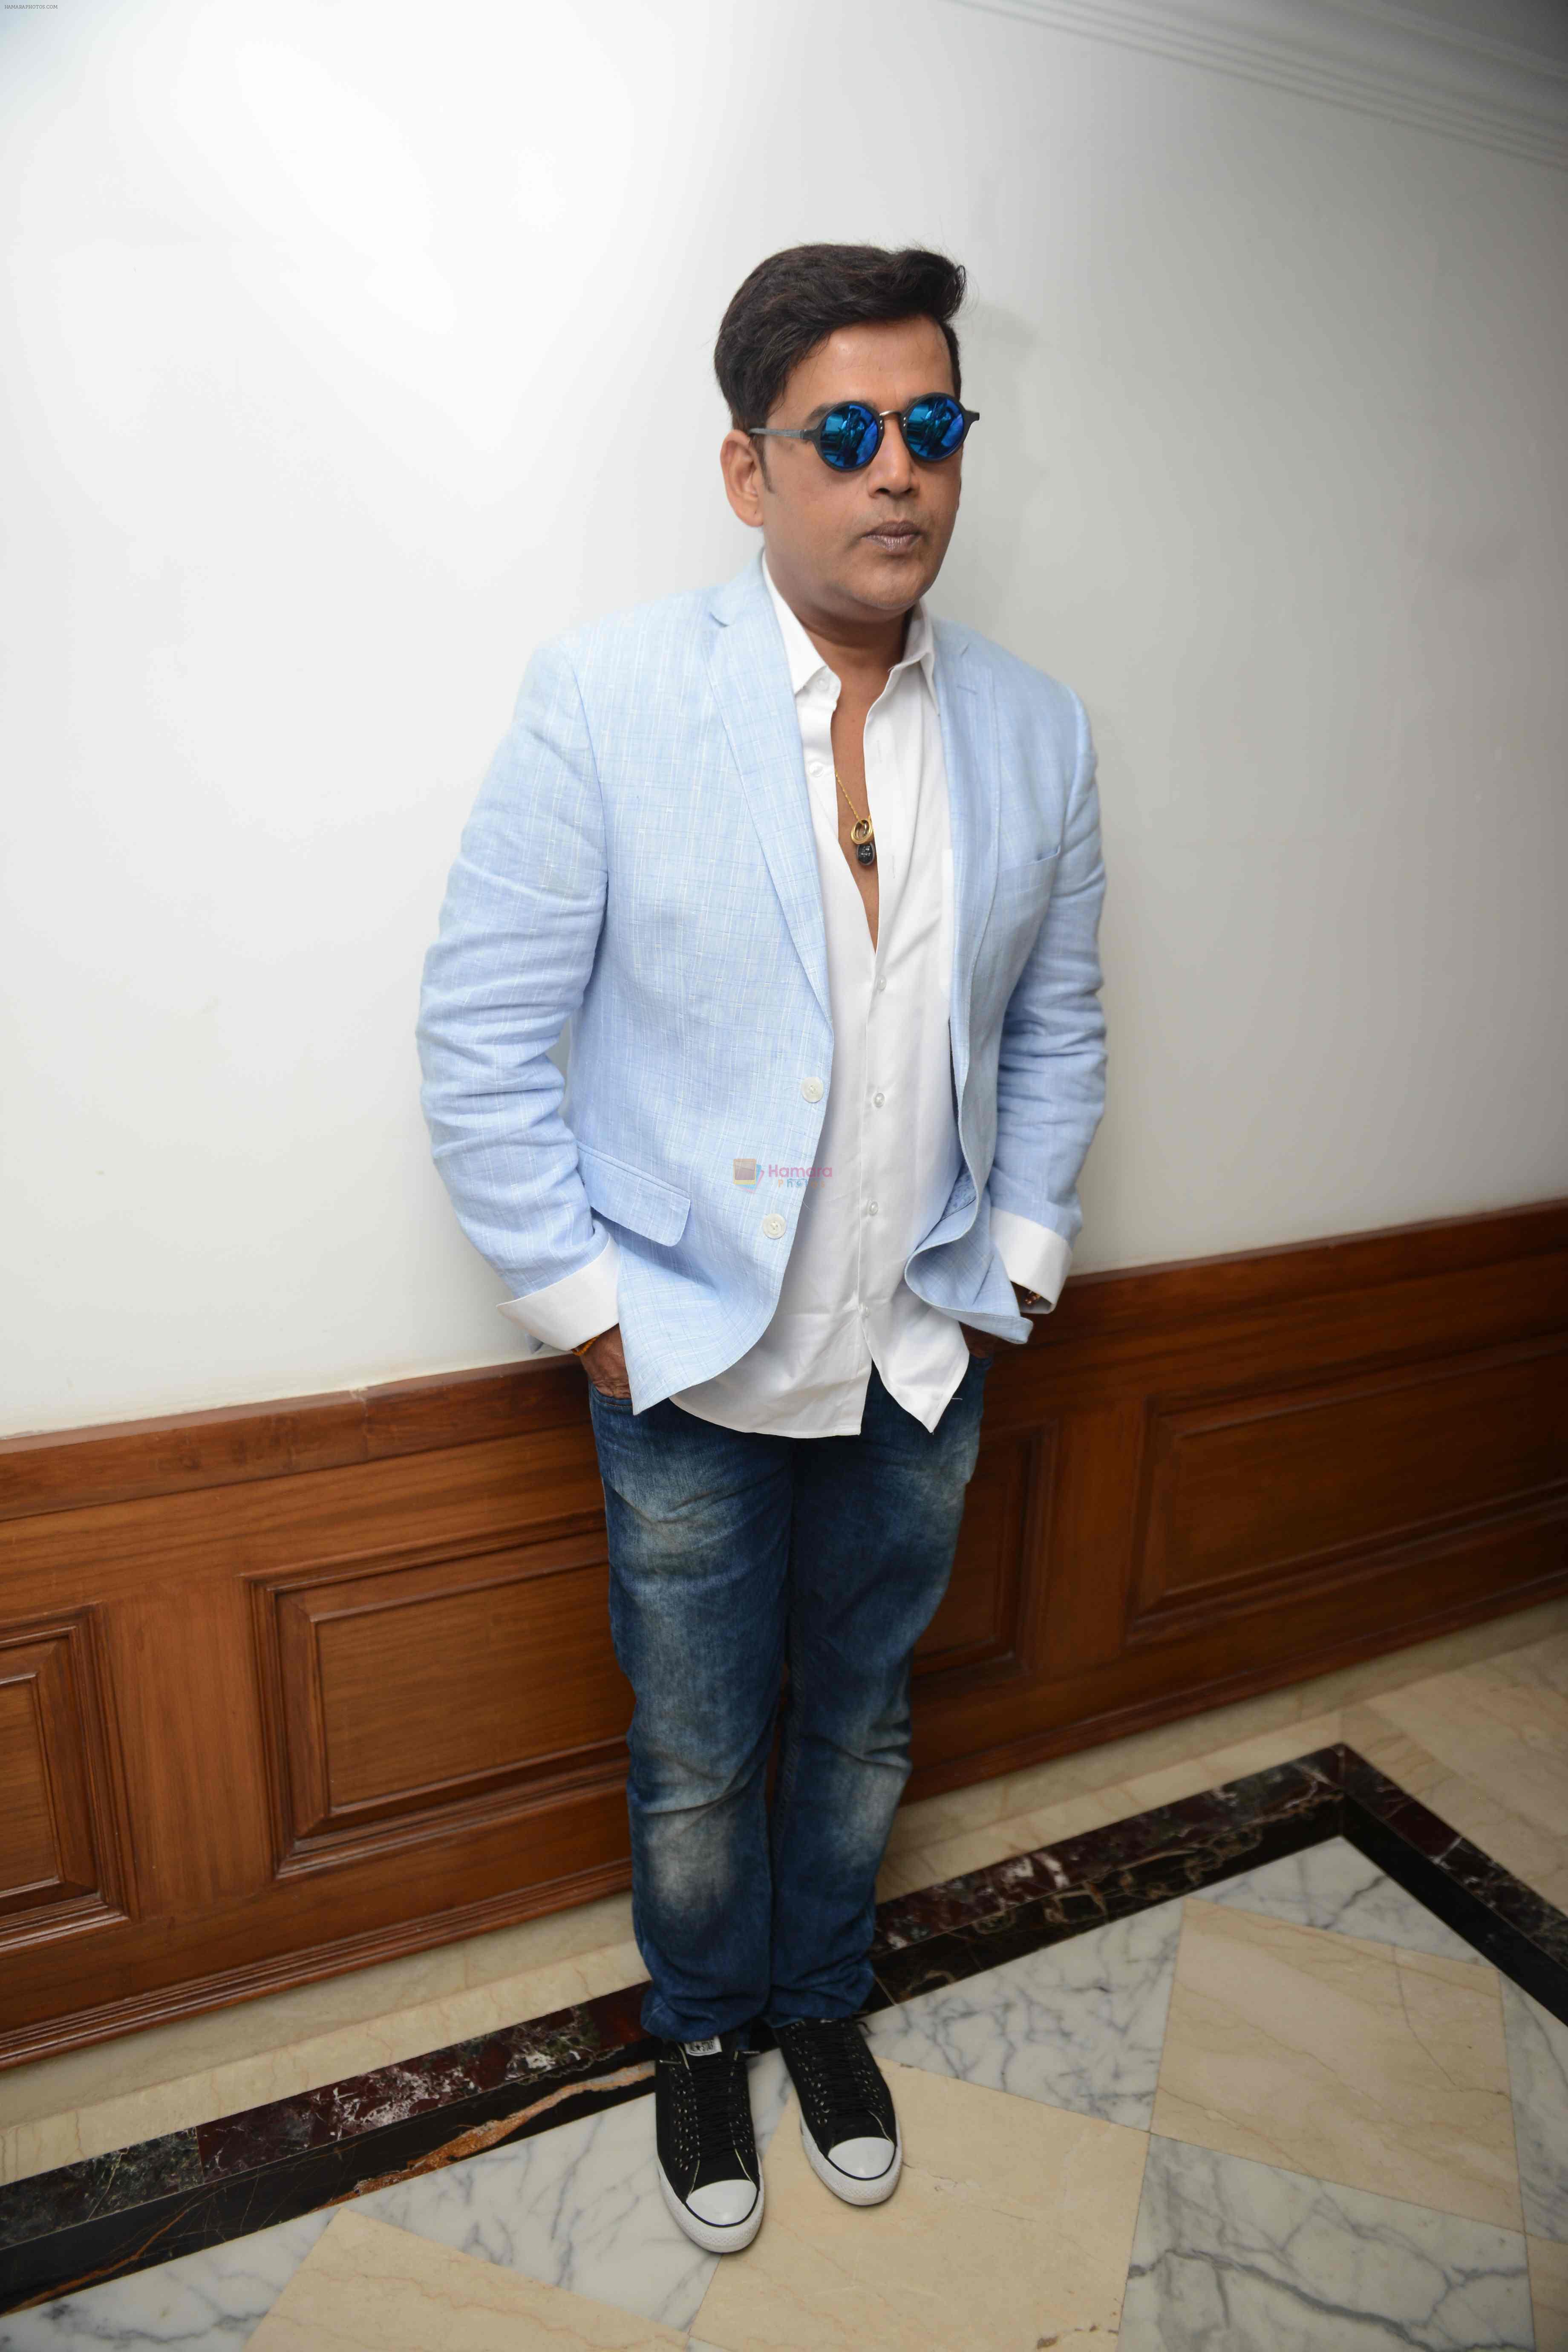 Ravi Kishan during the Press confrence of Luv Kush biggest Ram Leela at Constitutional Club, Rafi Marg in New Delhi on 31st July 2016